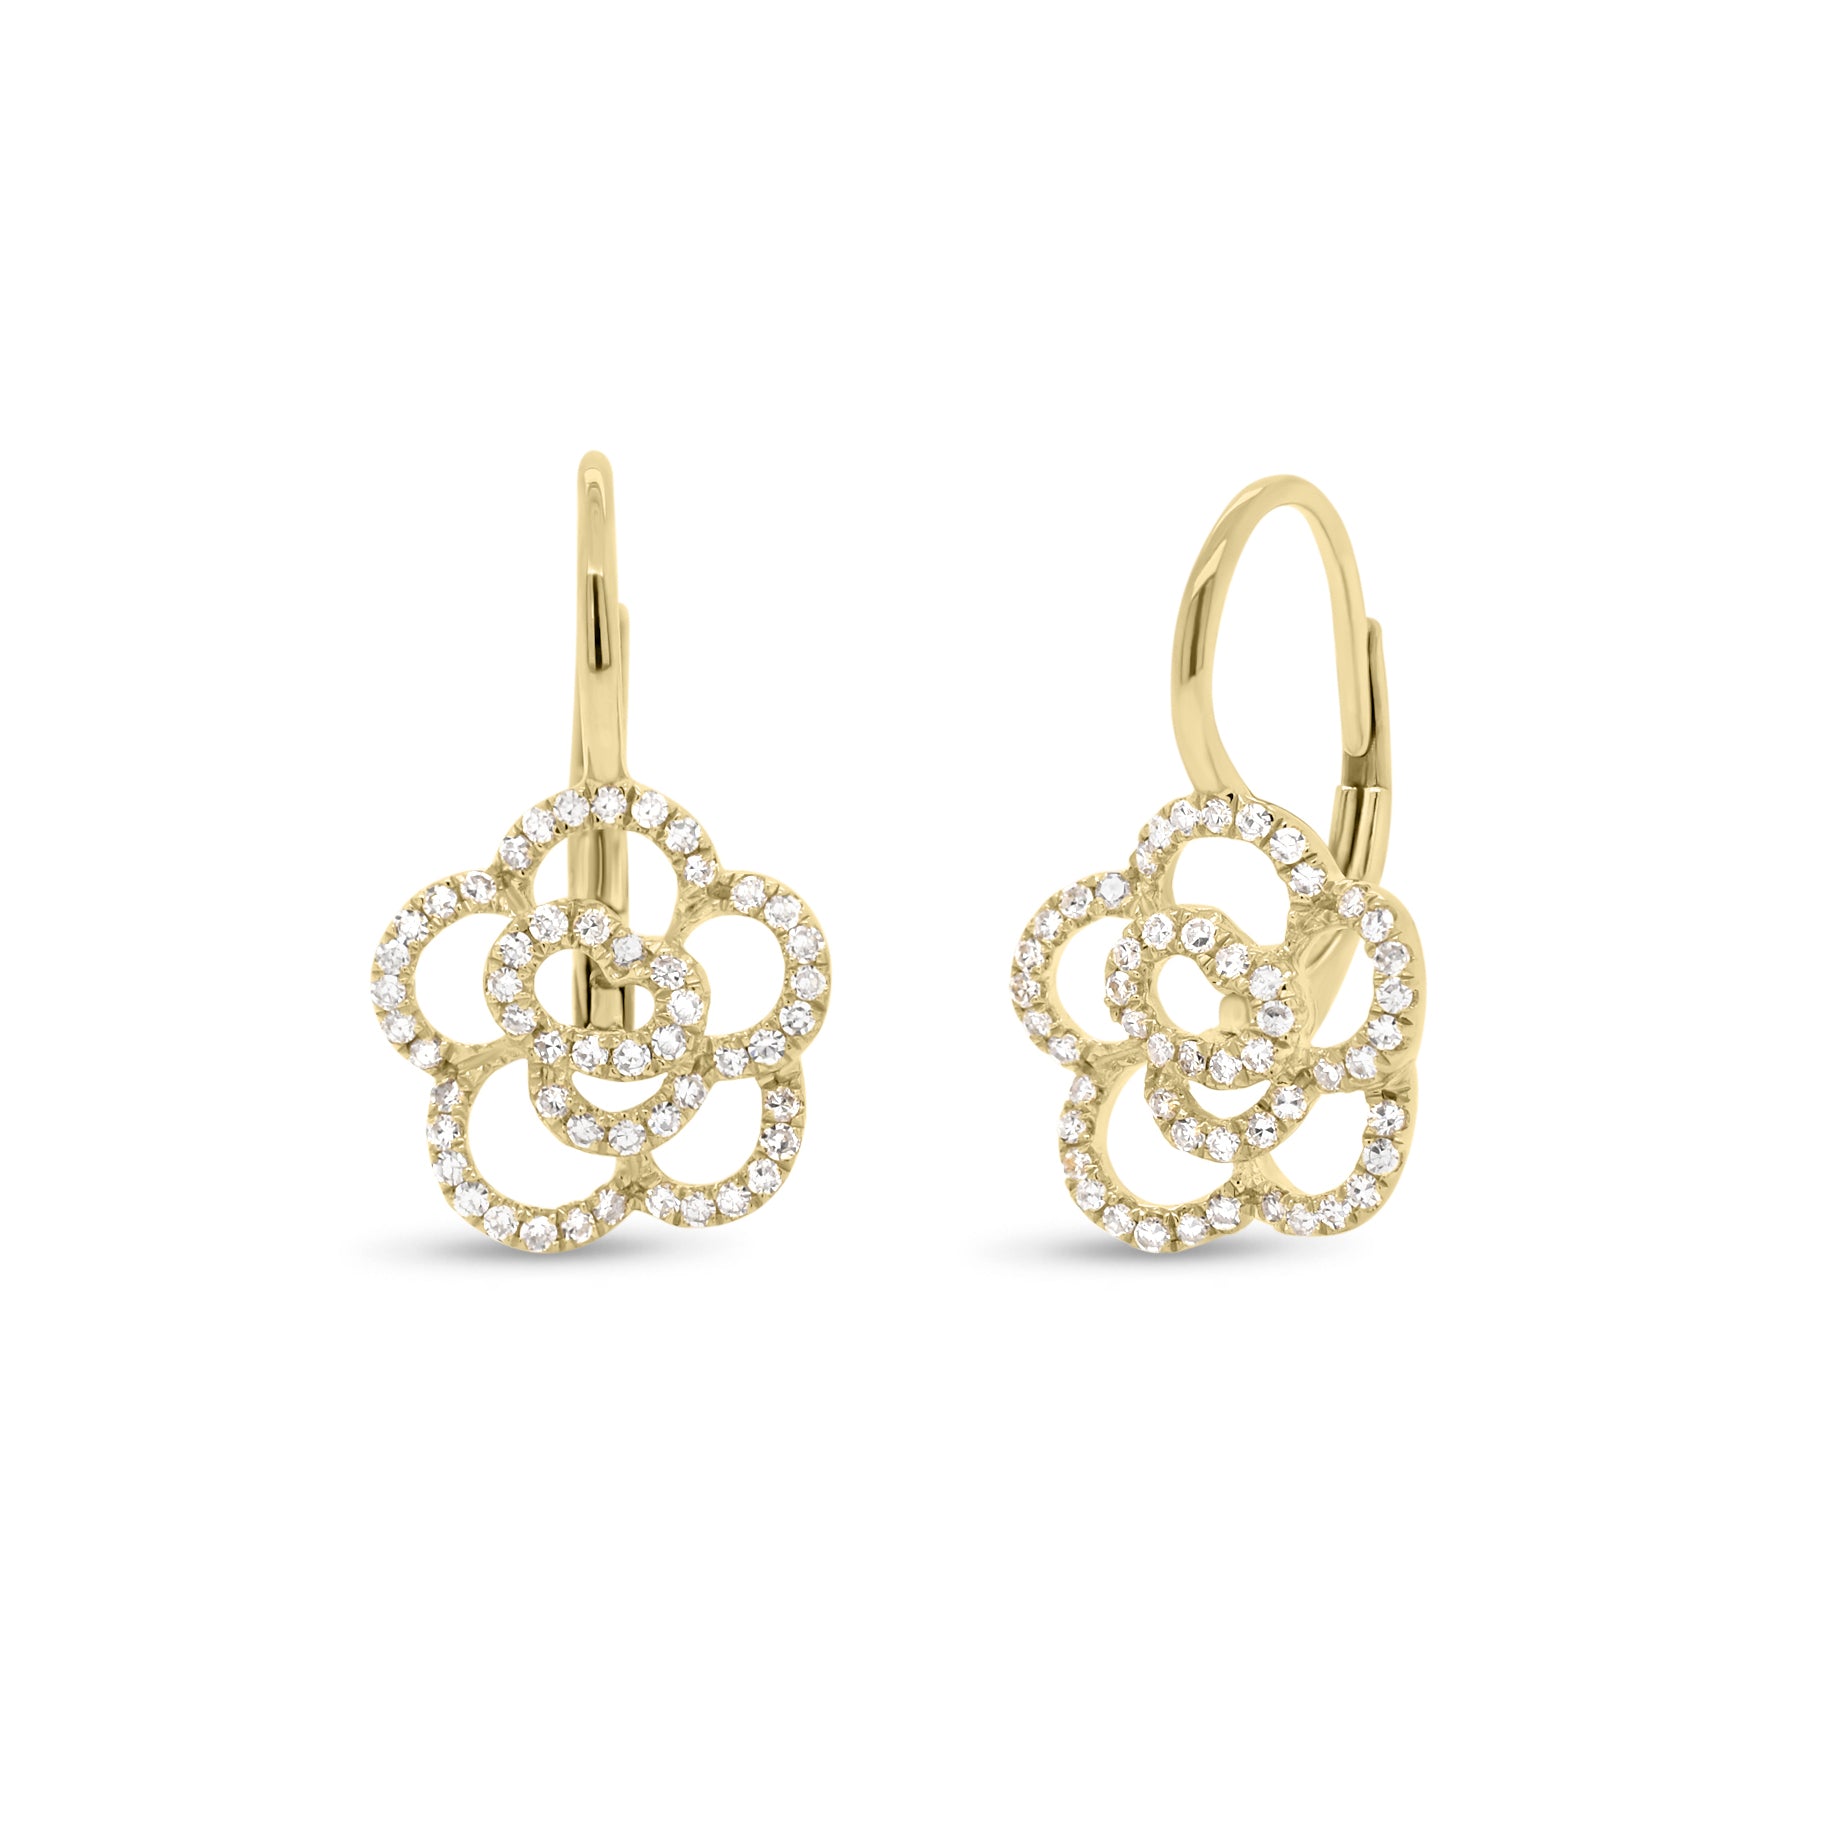 Diamond Rose Lever-Back Earrings - 14K yellow gold weighing 2.00 grams - 104 round diamonds totaling 0.32 carats